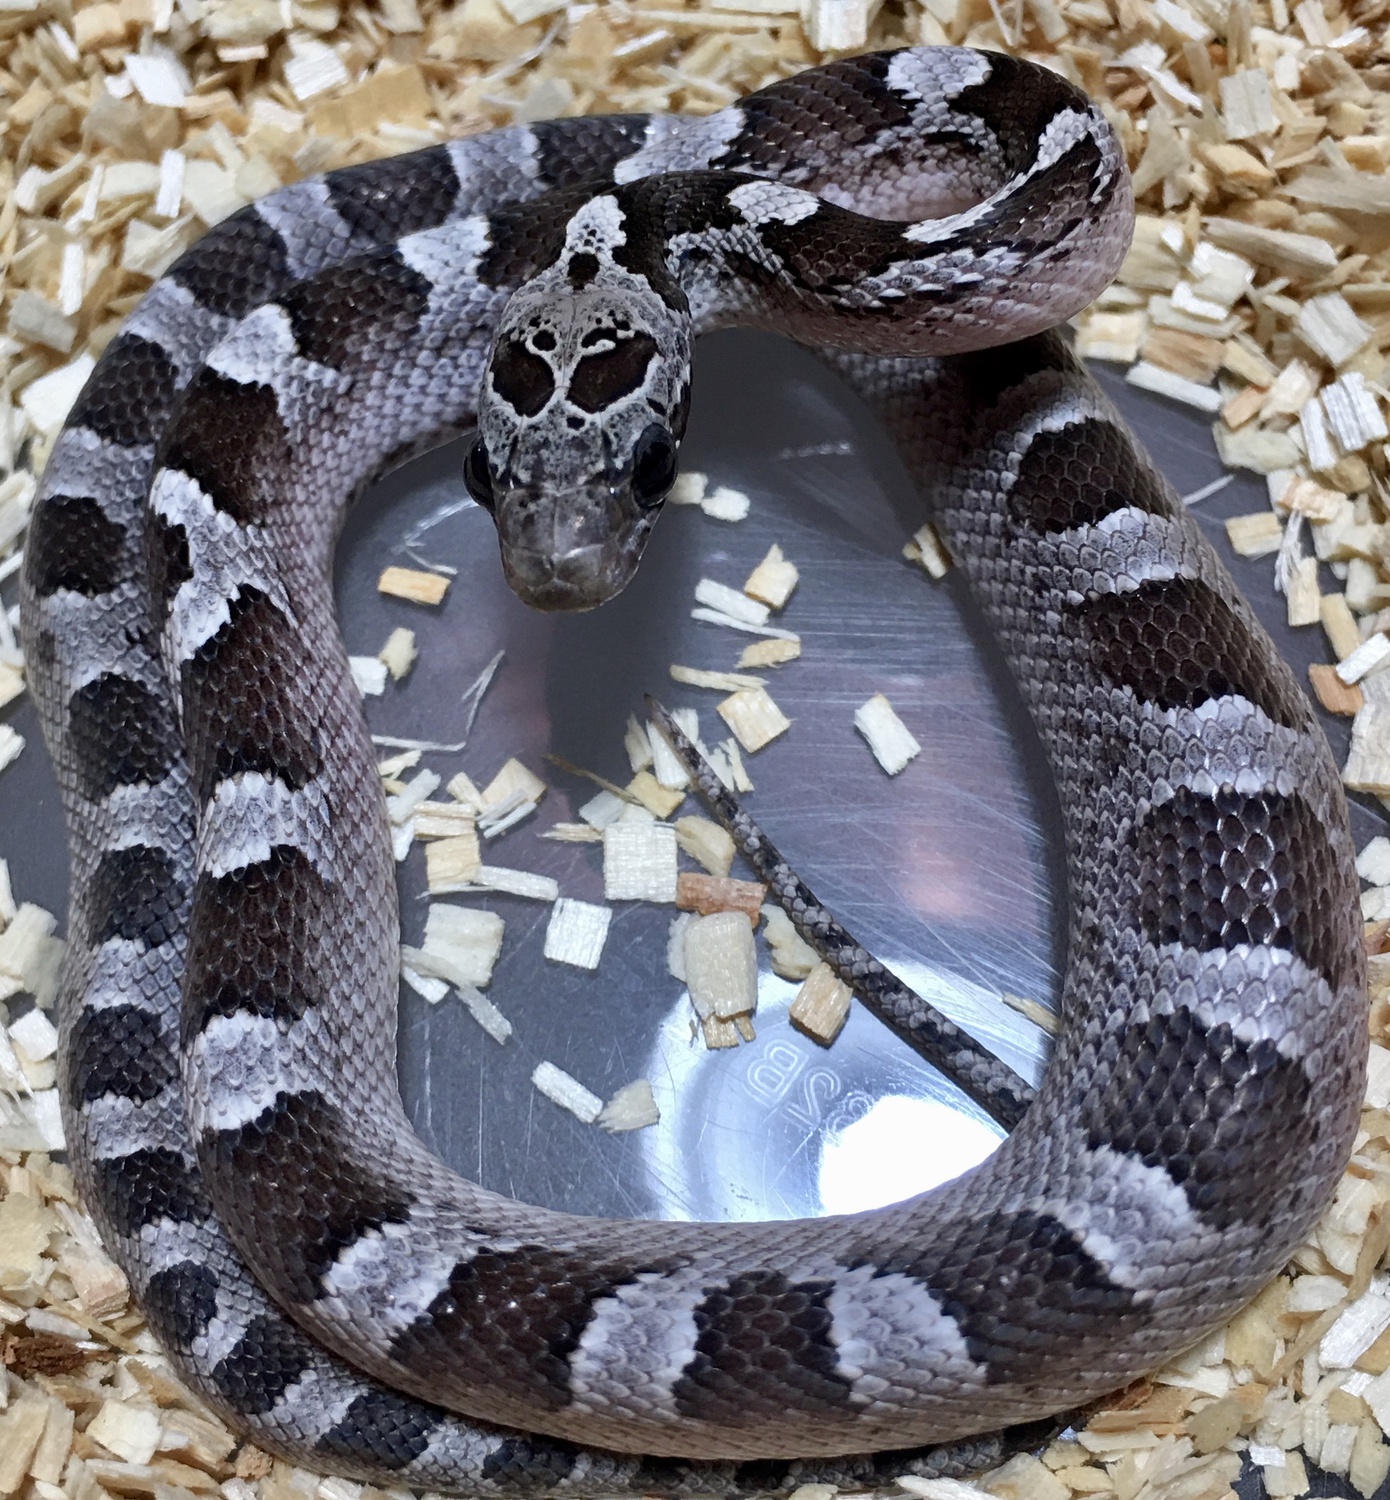 Granite Piedsided “Low Expression” by Hardee's Exotic Reptile Emporium